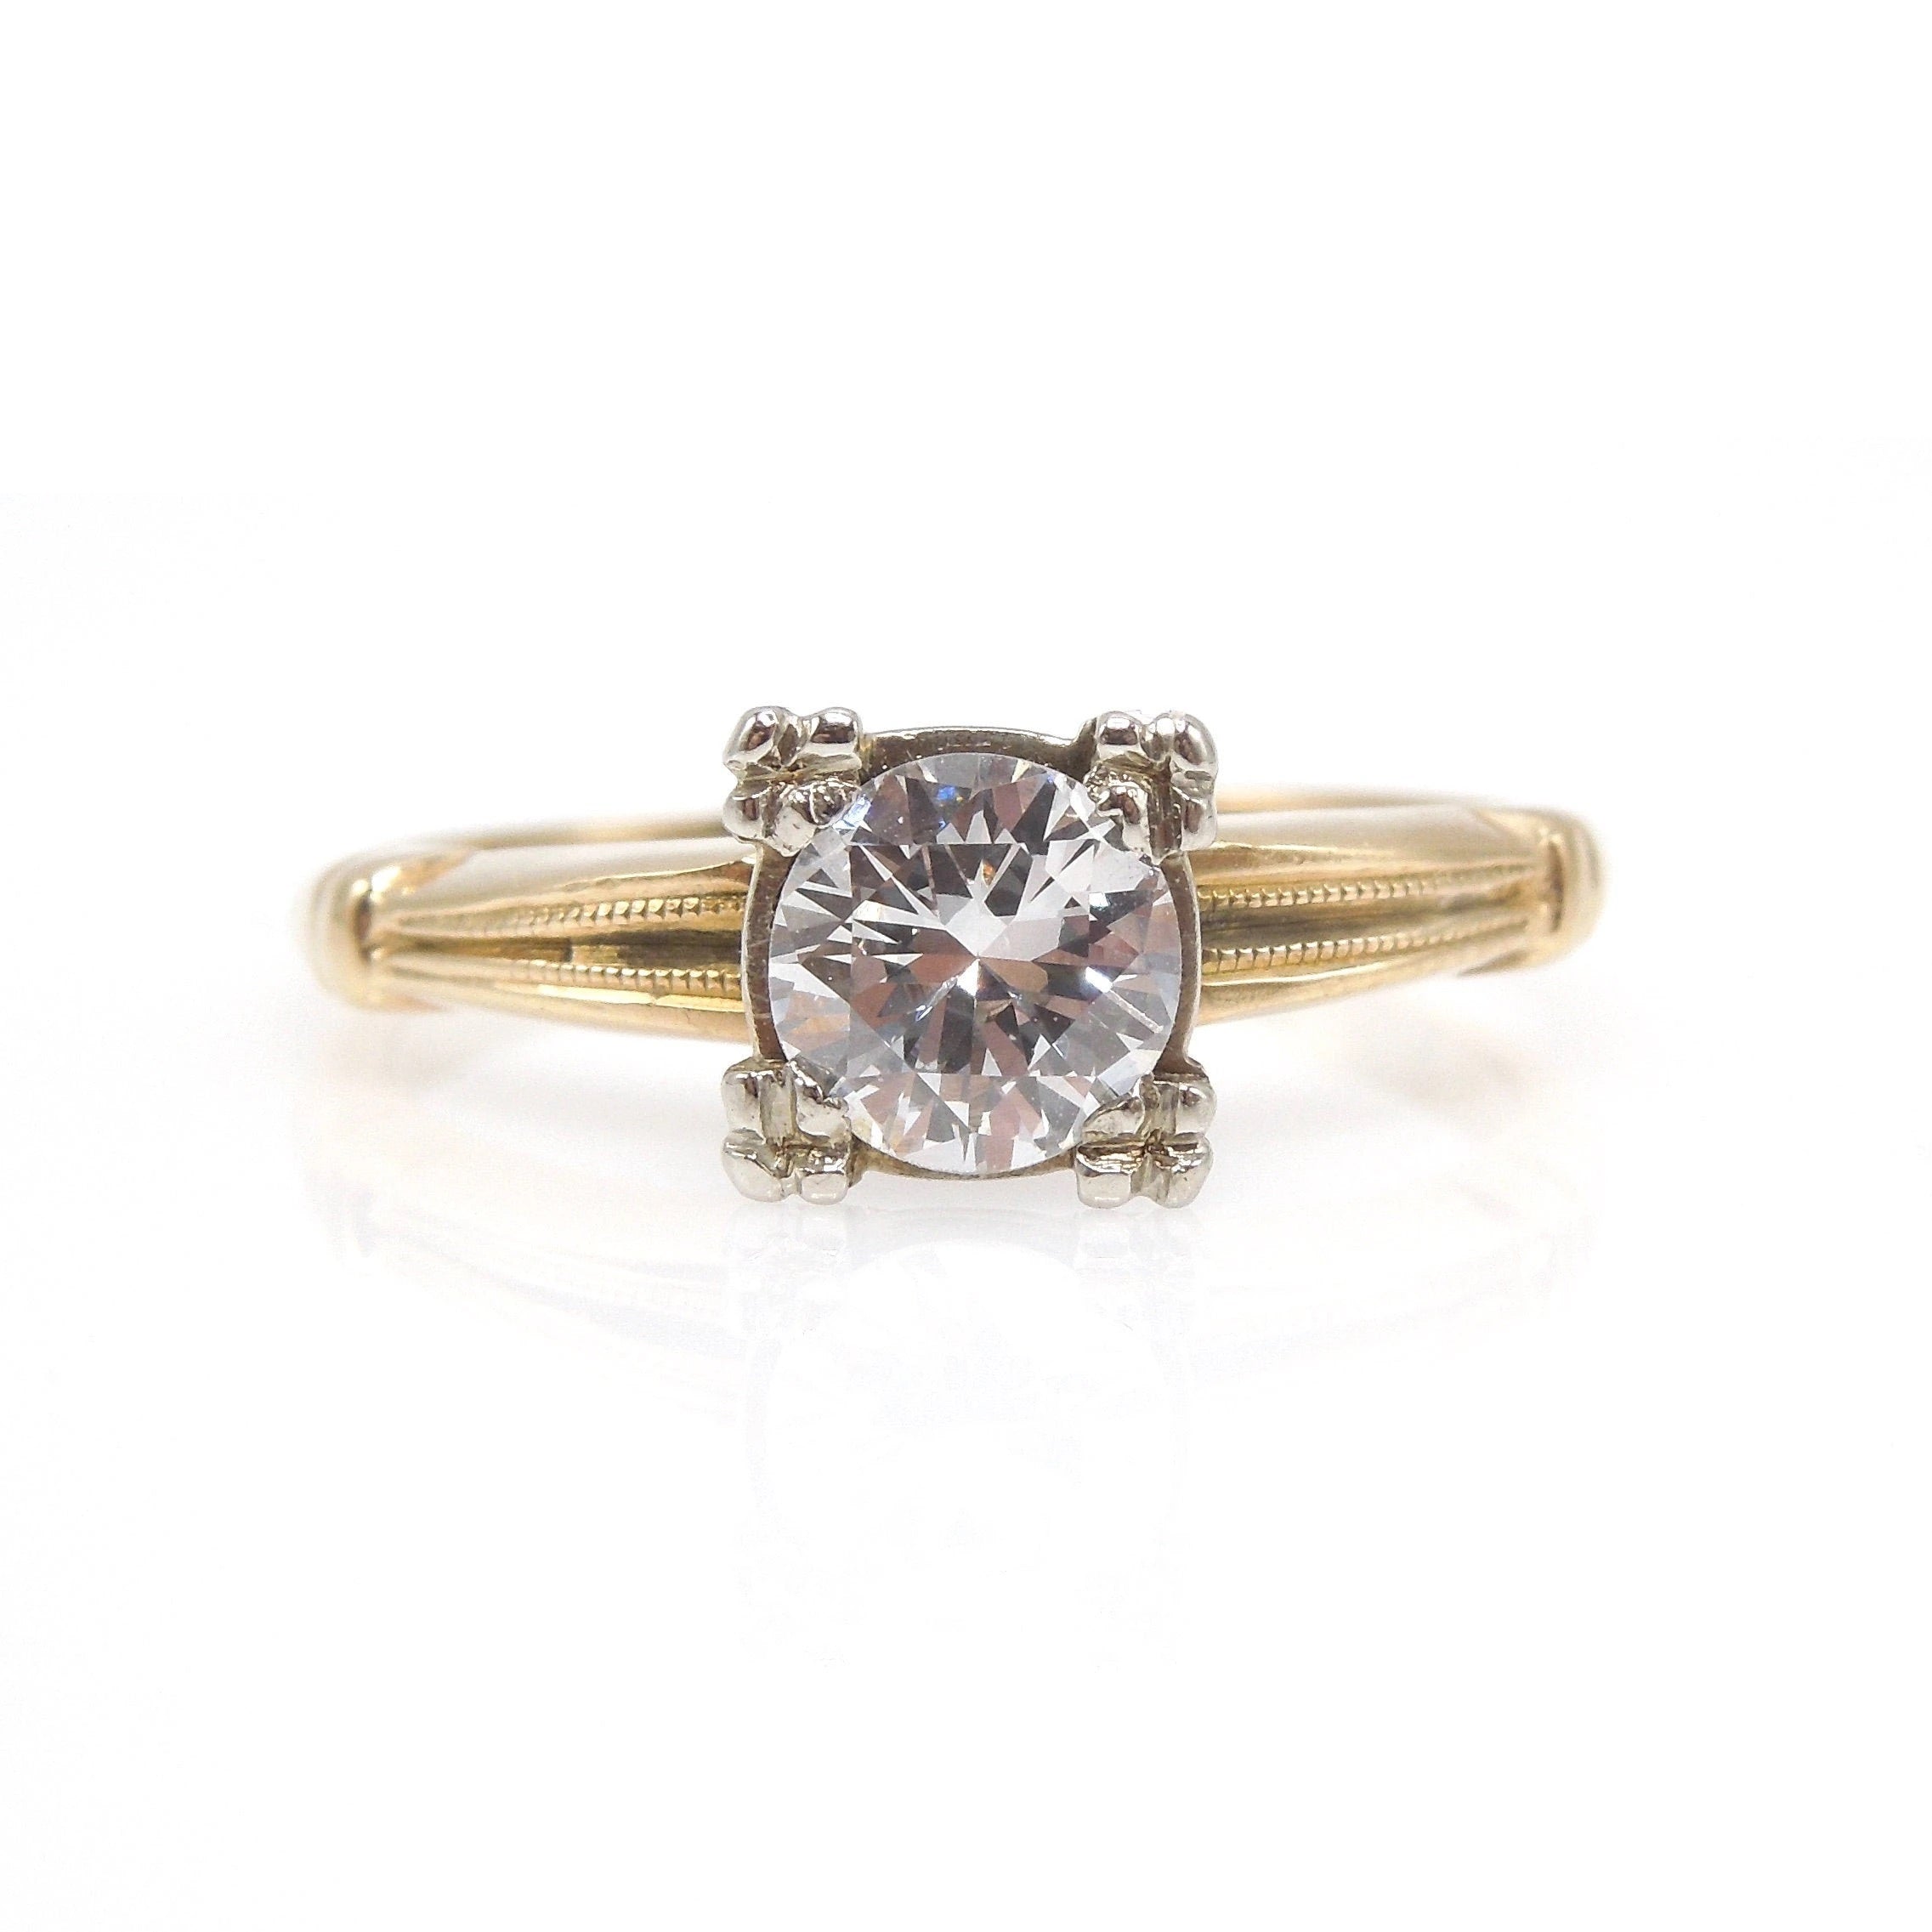 Bicolor 14K White and Yellow Gold 1930s Vintage 0.61ct Diamond Engagement Ring